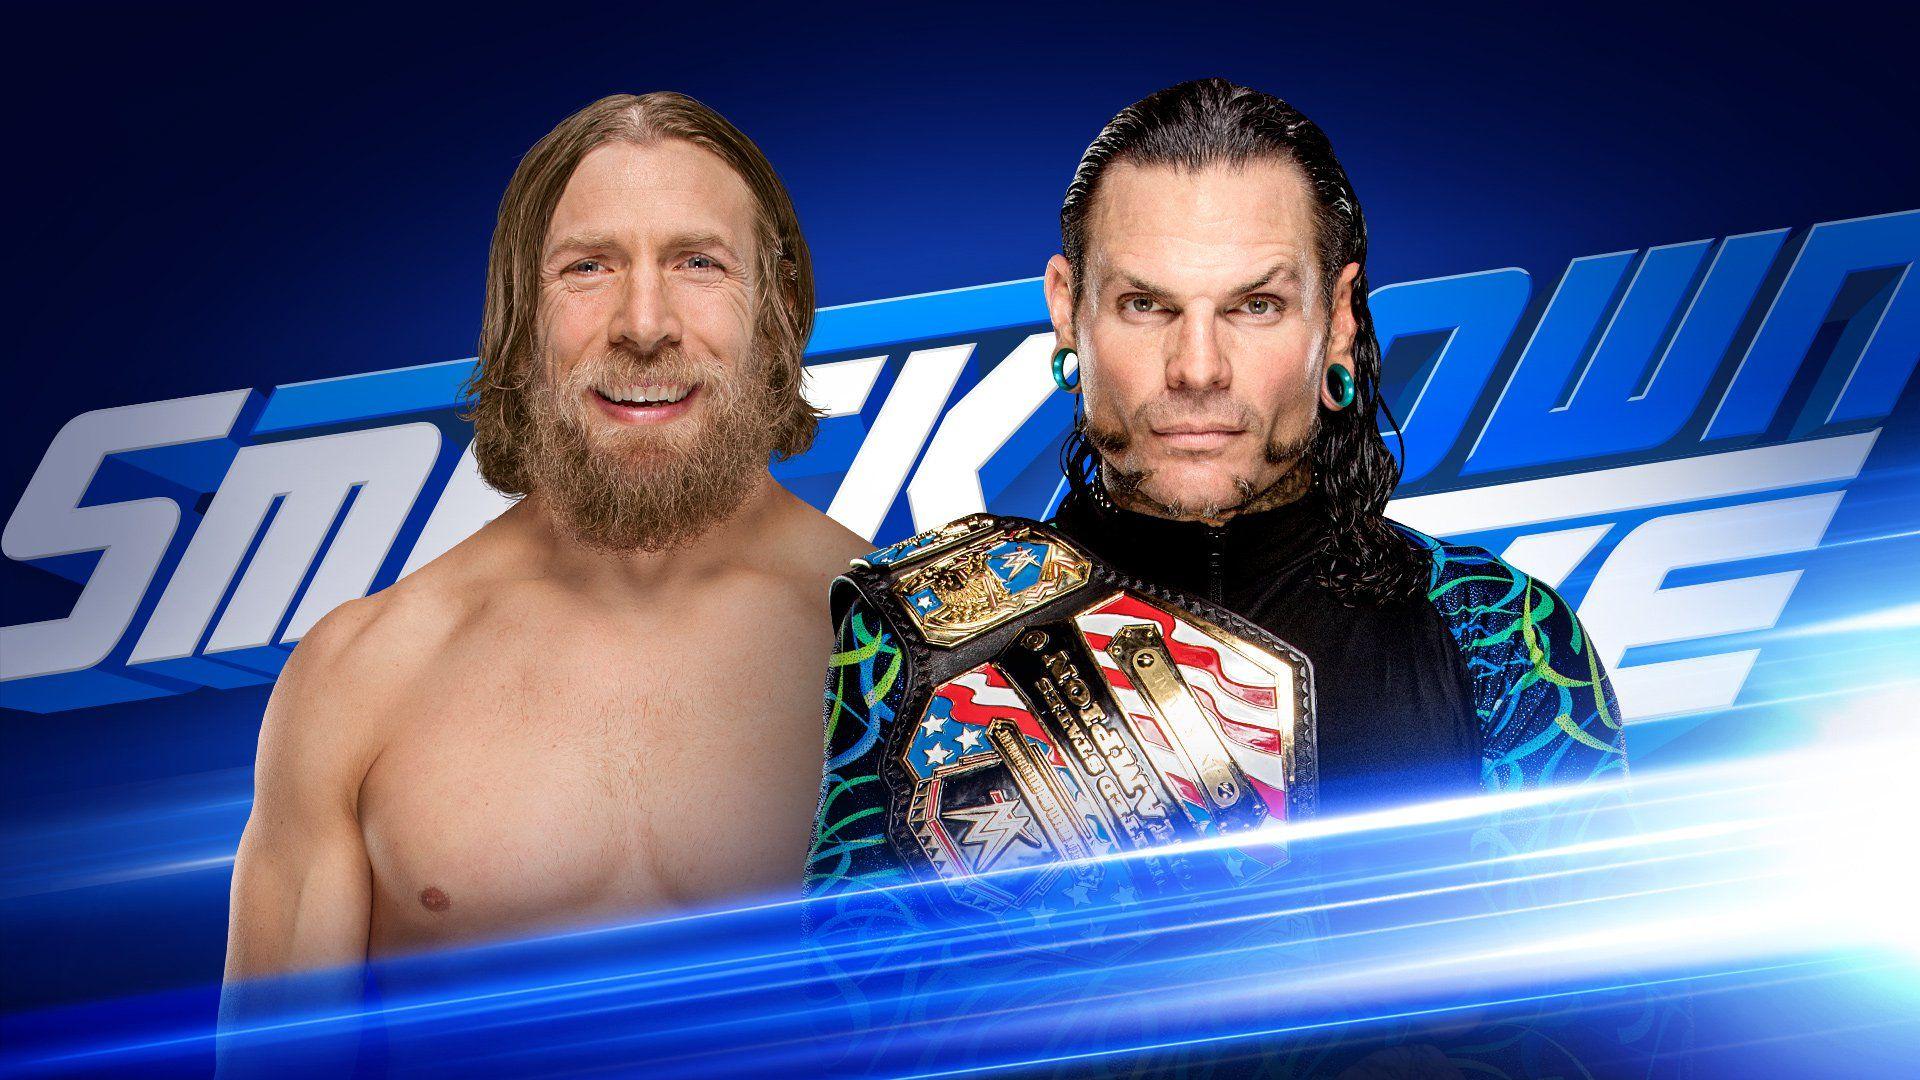 Daniel Bryan and Jeff Hardy to battle in a match with WWE Money